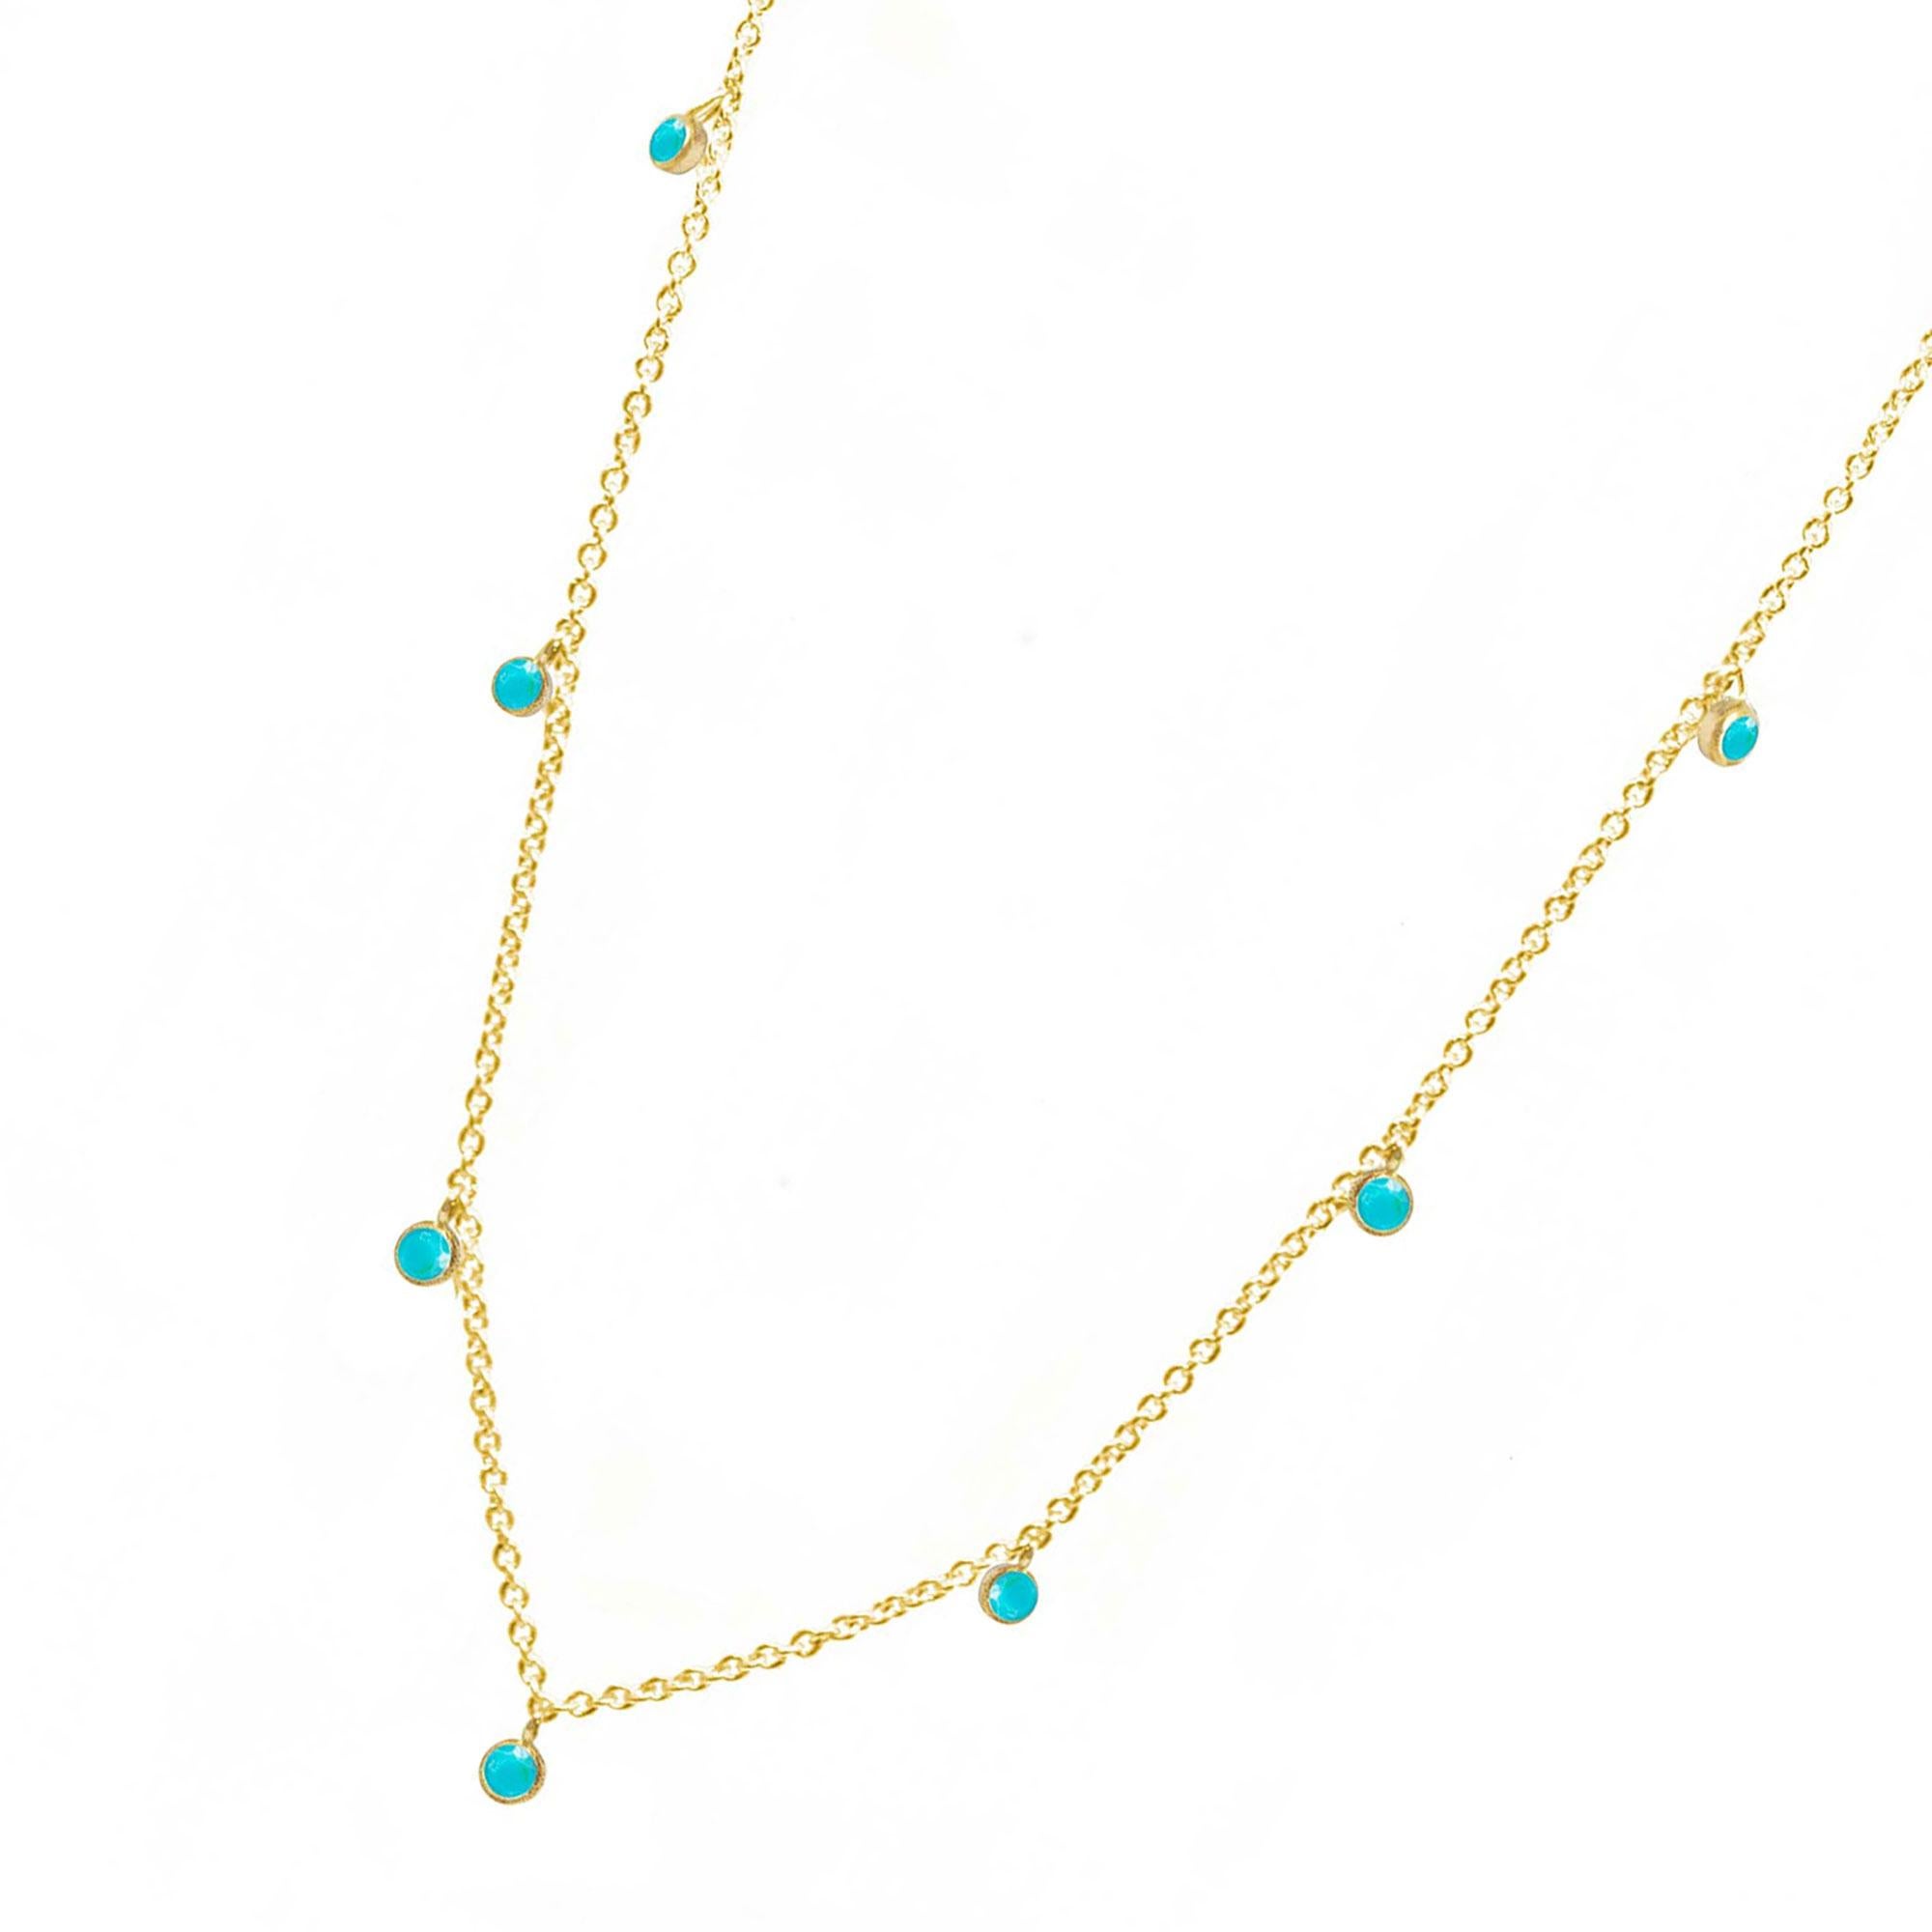 Made with turquoise gemstone rimmed in gold, our Forged Gold Necklace provides an effortless, yet fashionable style.

Details
Metal: 18K Yellow Gold
Stone carat: 0.75
Length: 15-17''
Stone size: 2.5mm

About the stones:
Genuine Turquoise: Turquoise